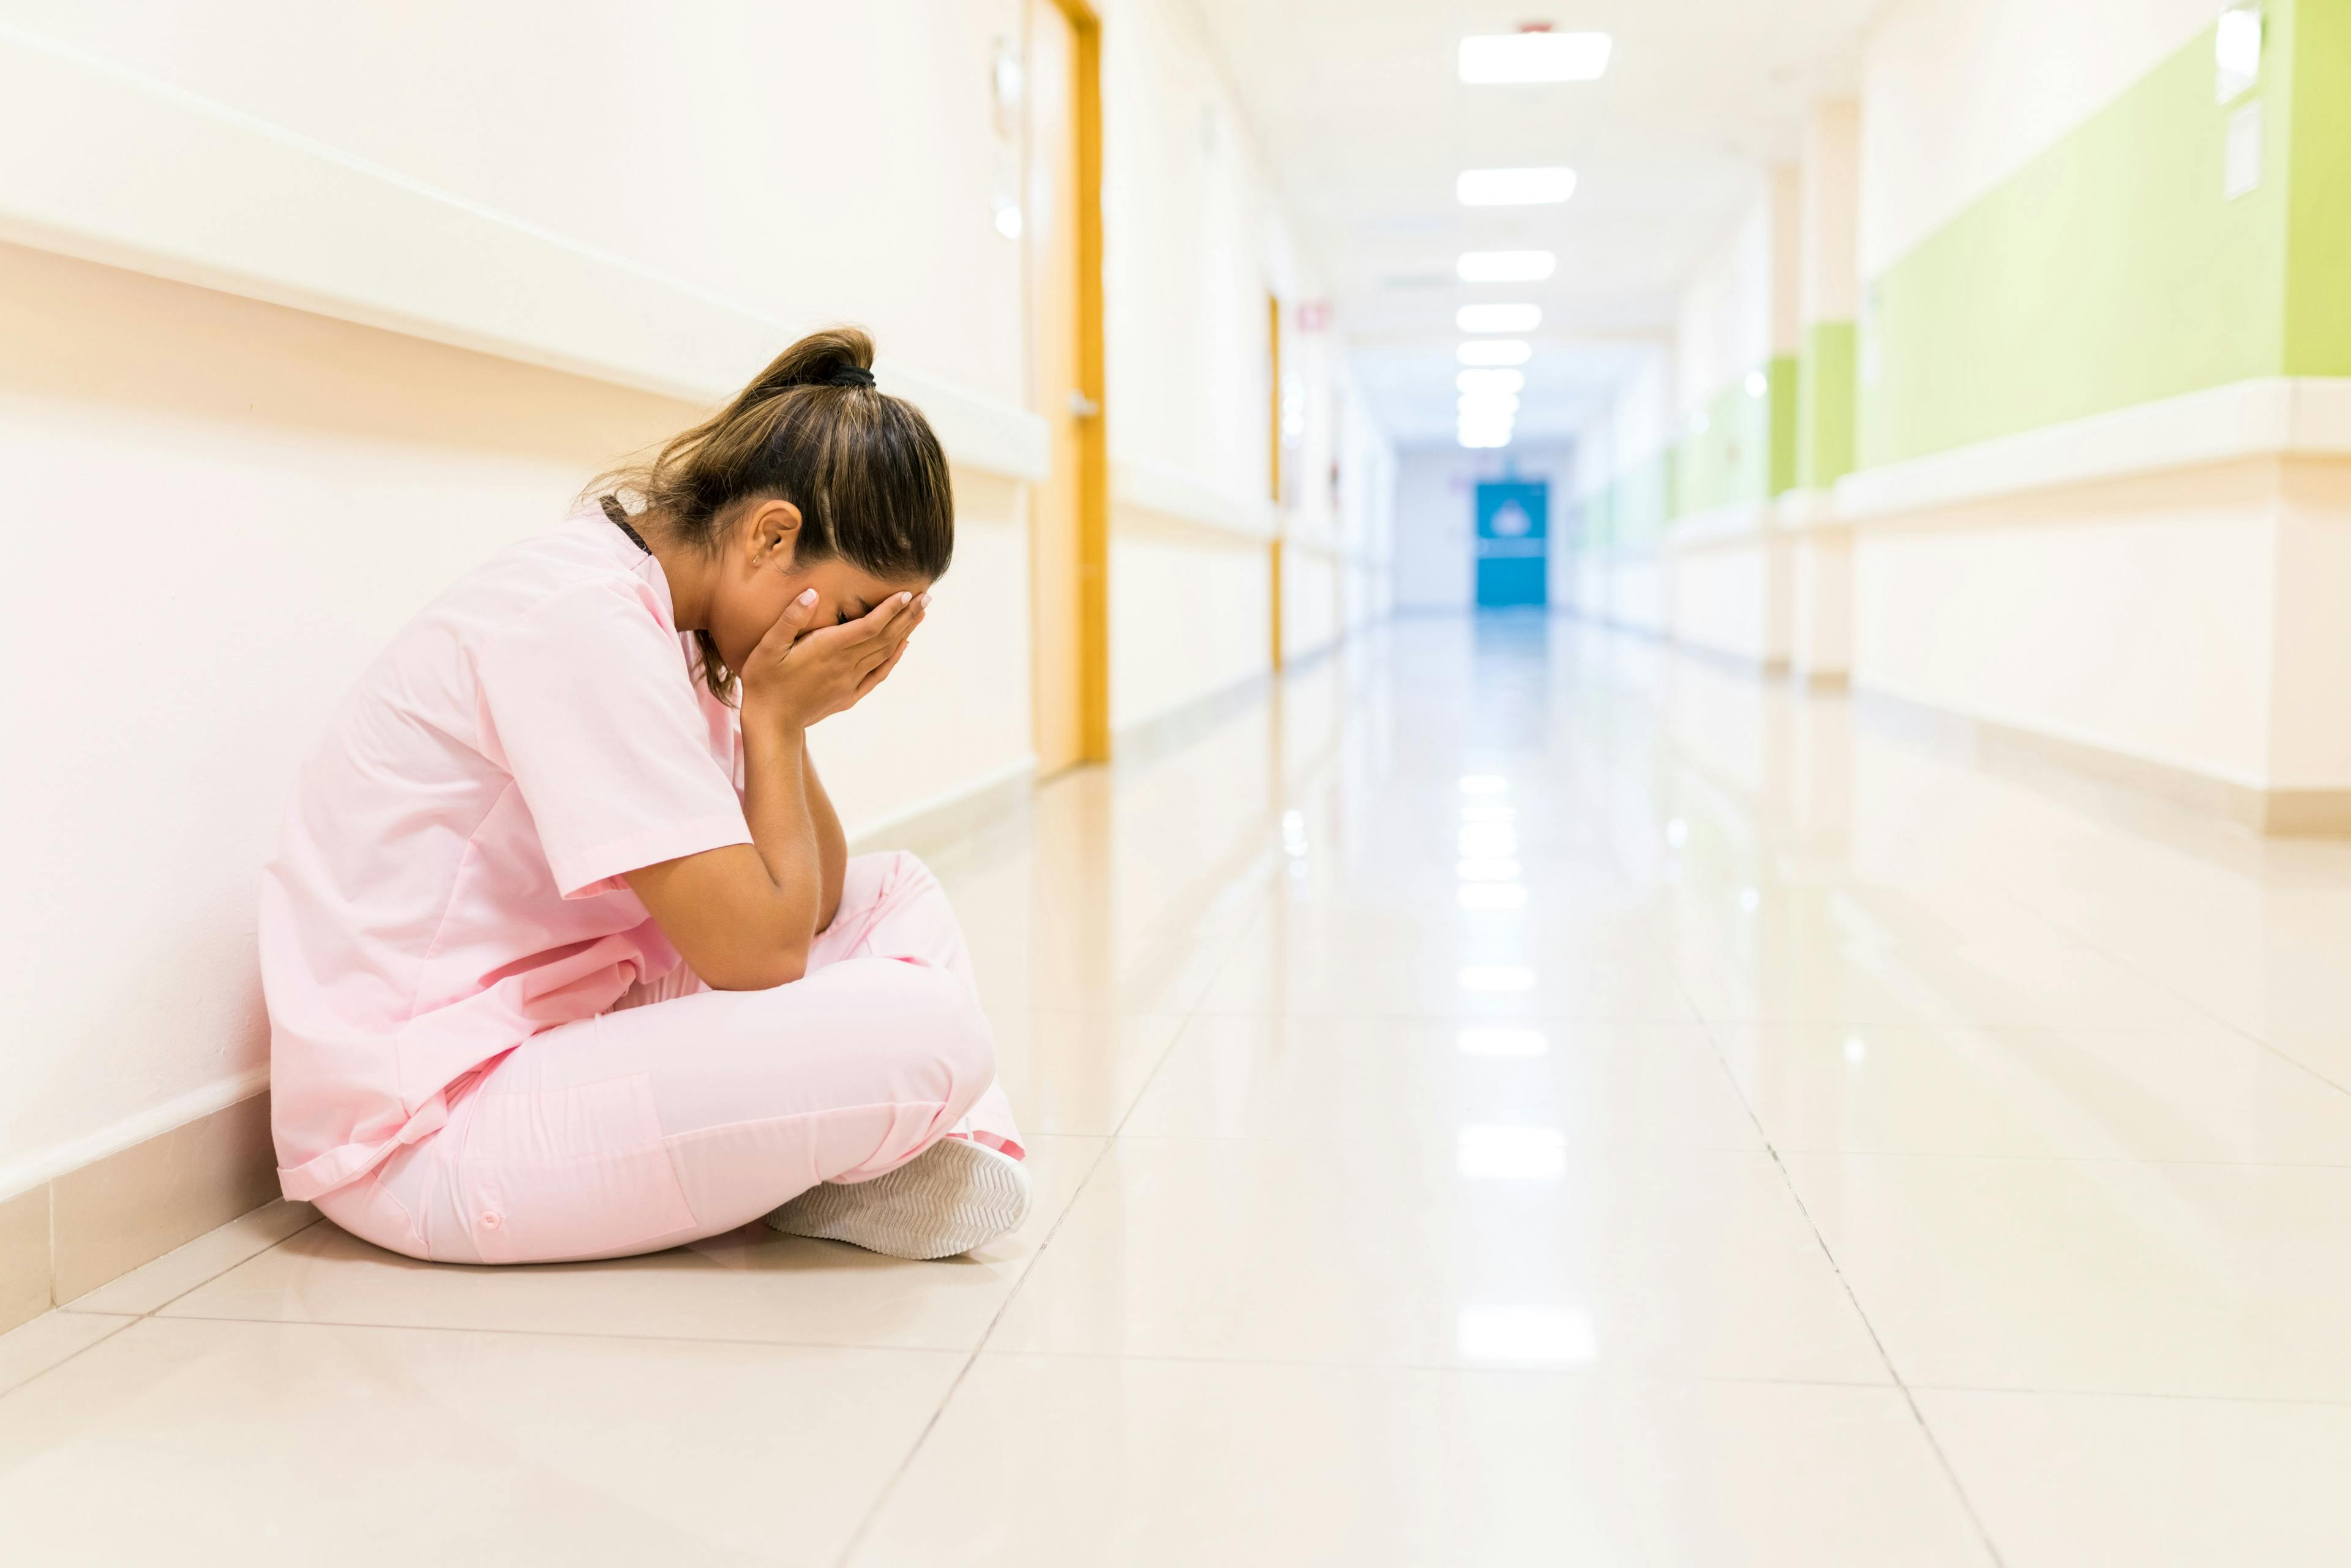 Nurses with depression more likely to be hospitalized with COVID-19: Study